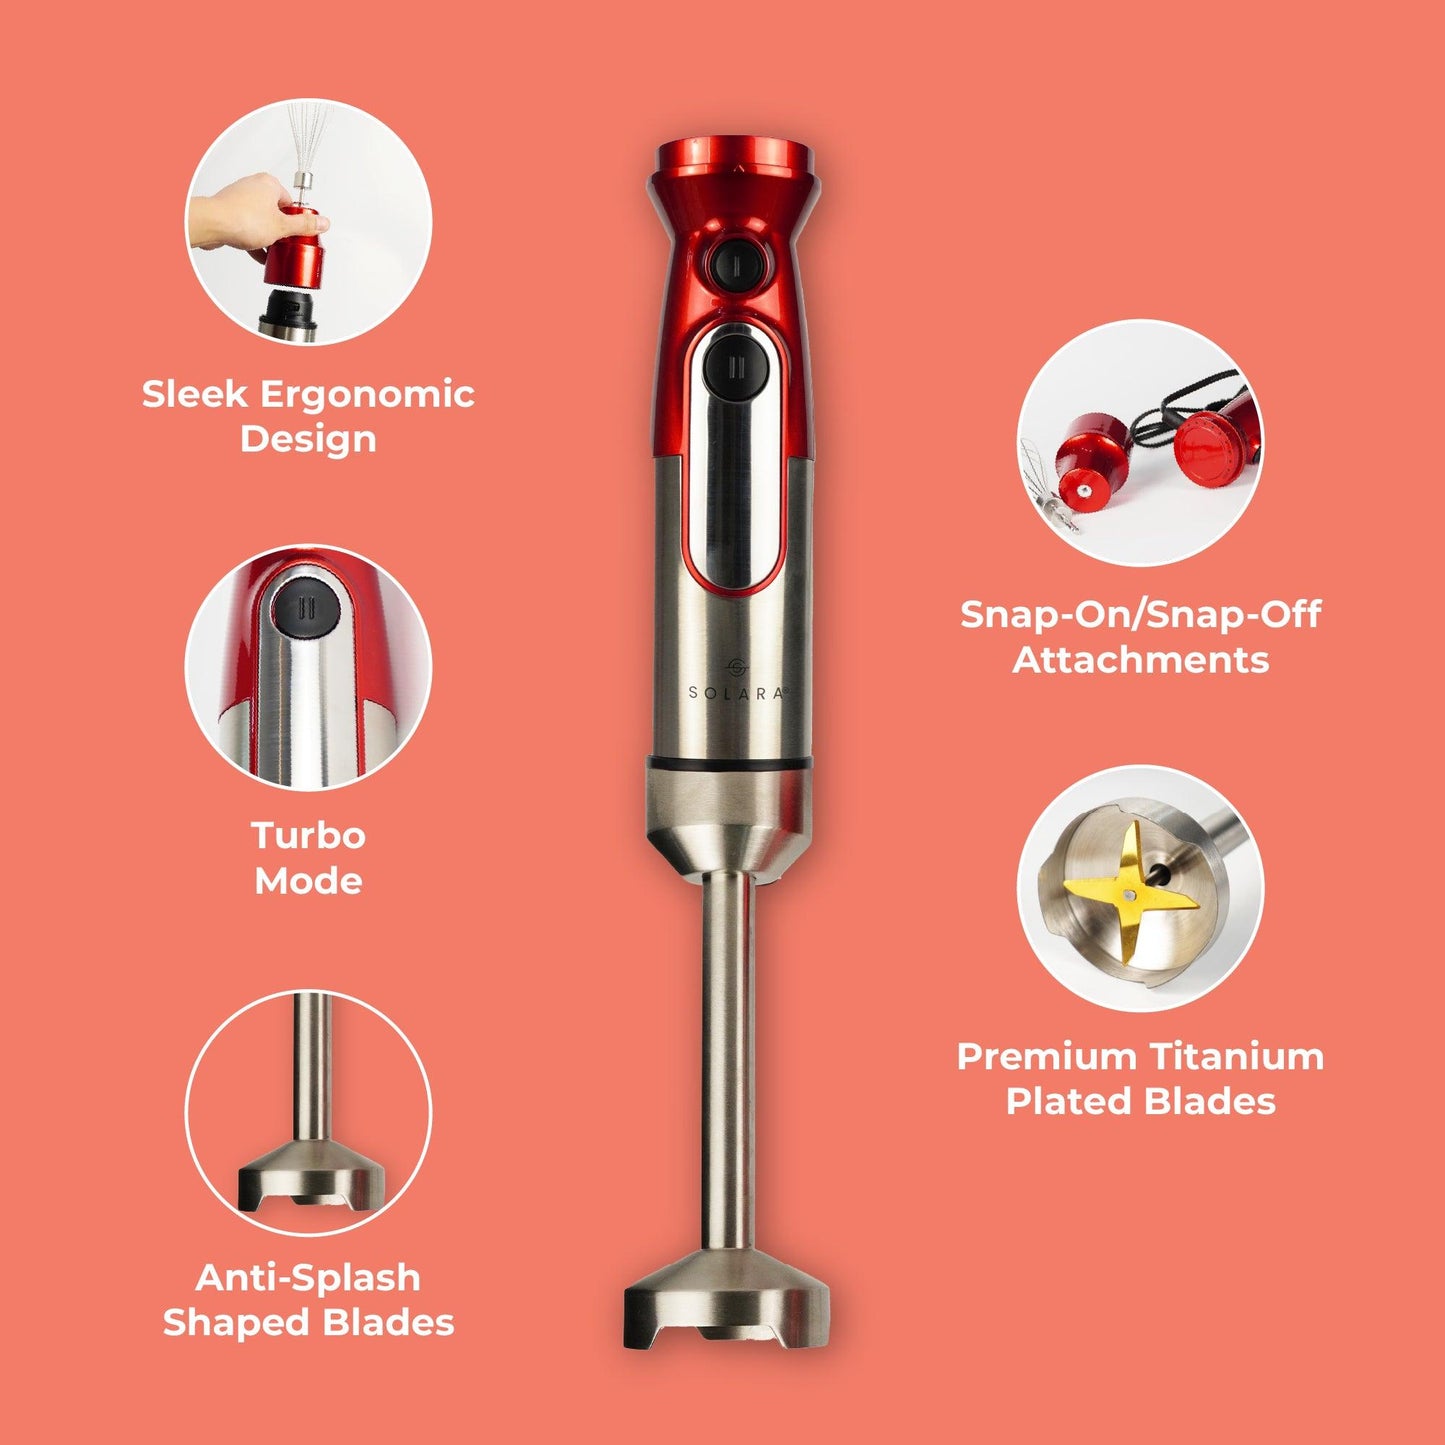 SOLARA 600Watt Electric Hand Blender for Kitchen with Whisk & Mixing Jar